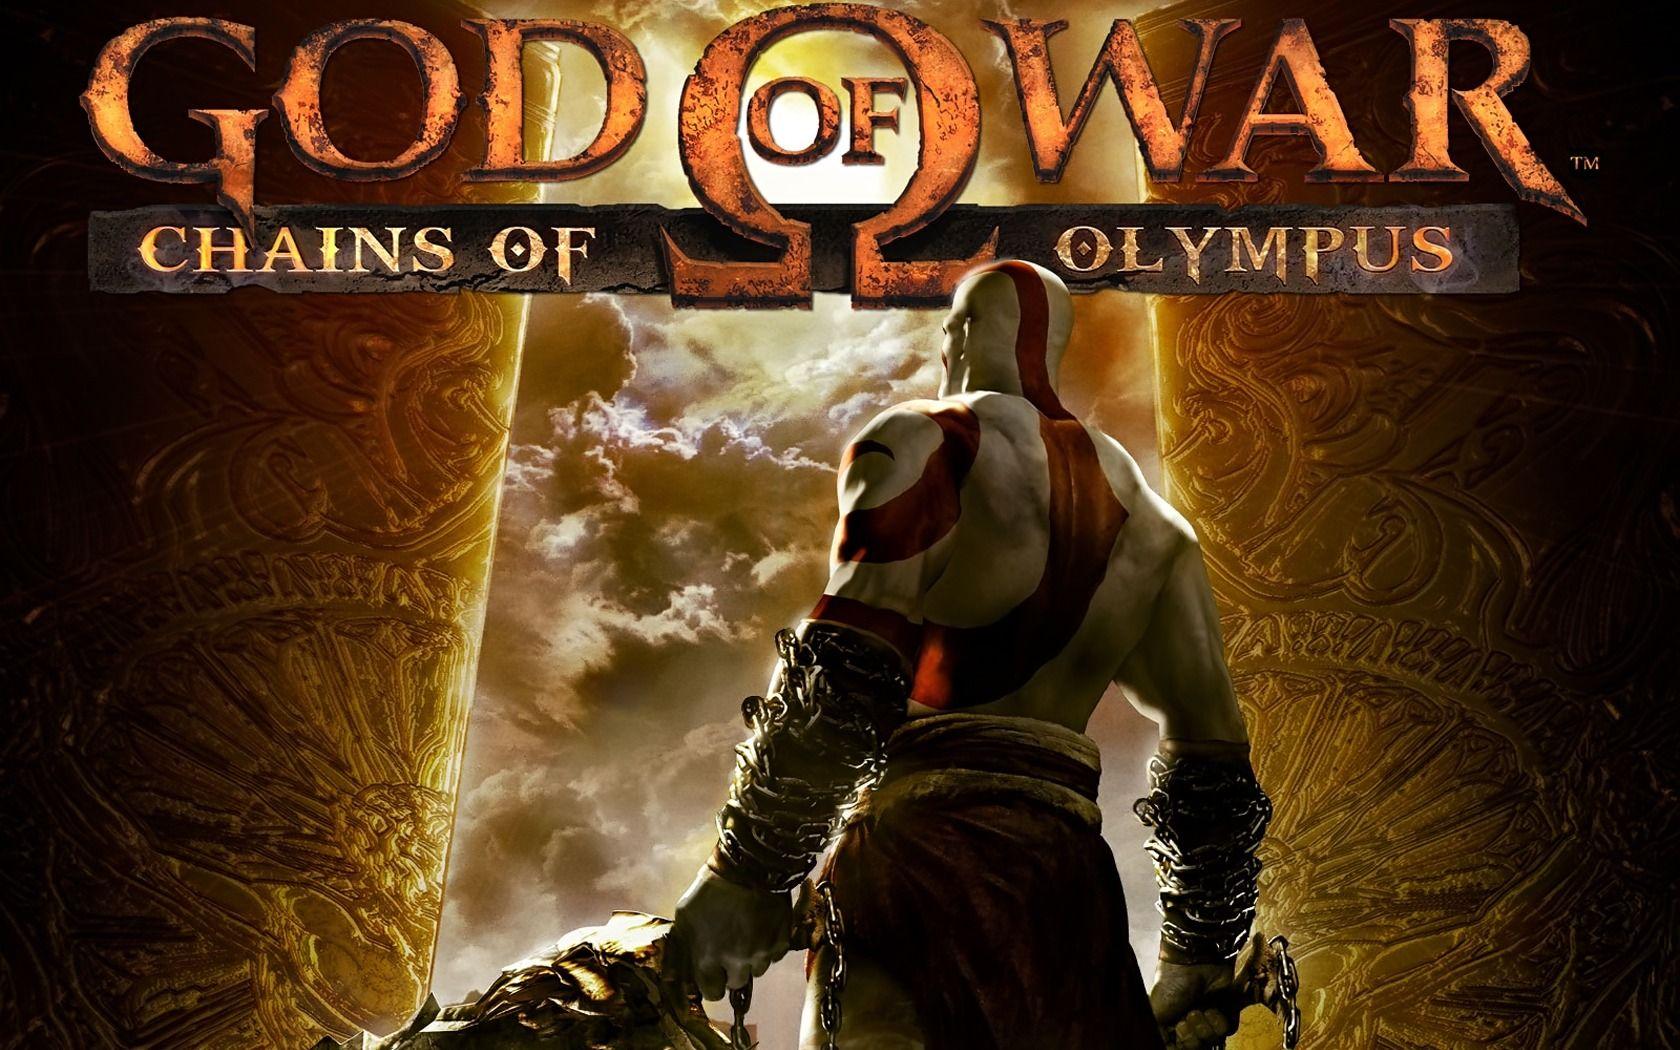 God of War Chains of Olympus Wallpaper God of War Games Wallpaper in jpg format for free download